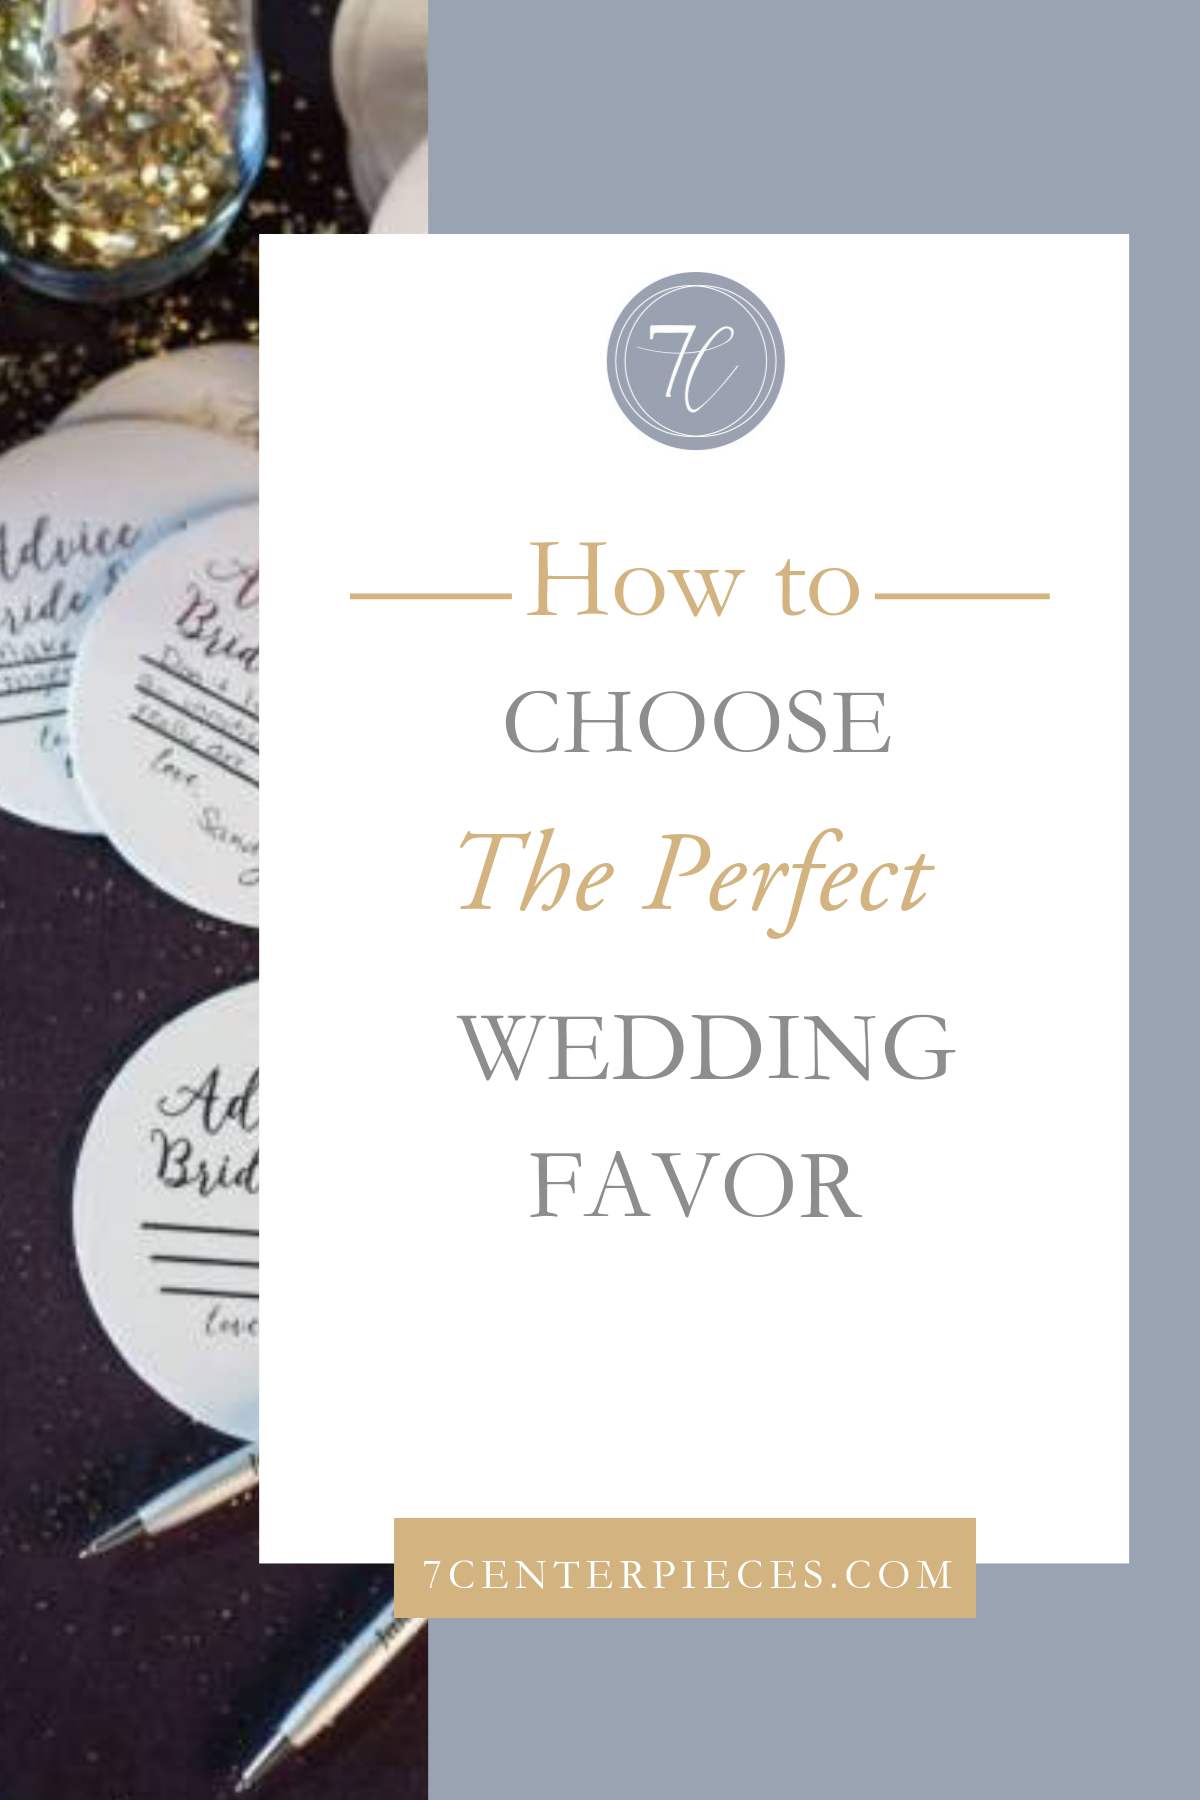 How to Choose The Perfect Wedding Favor